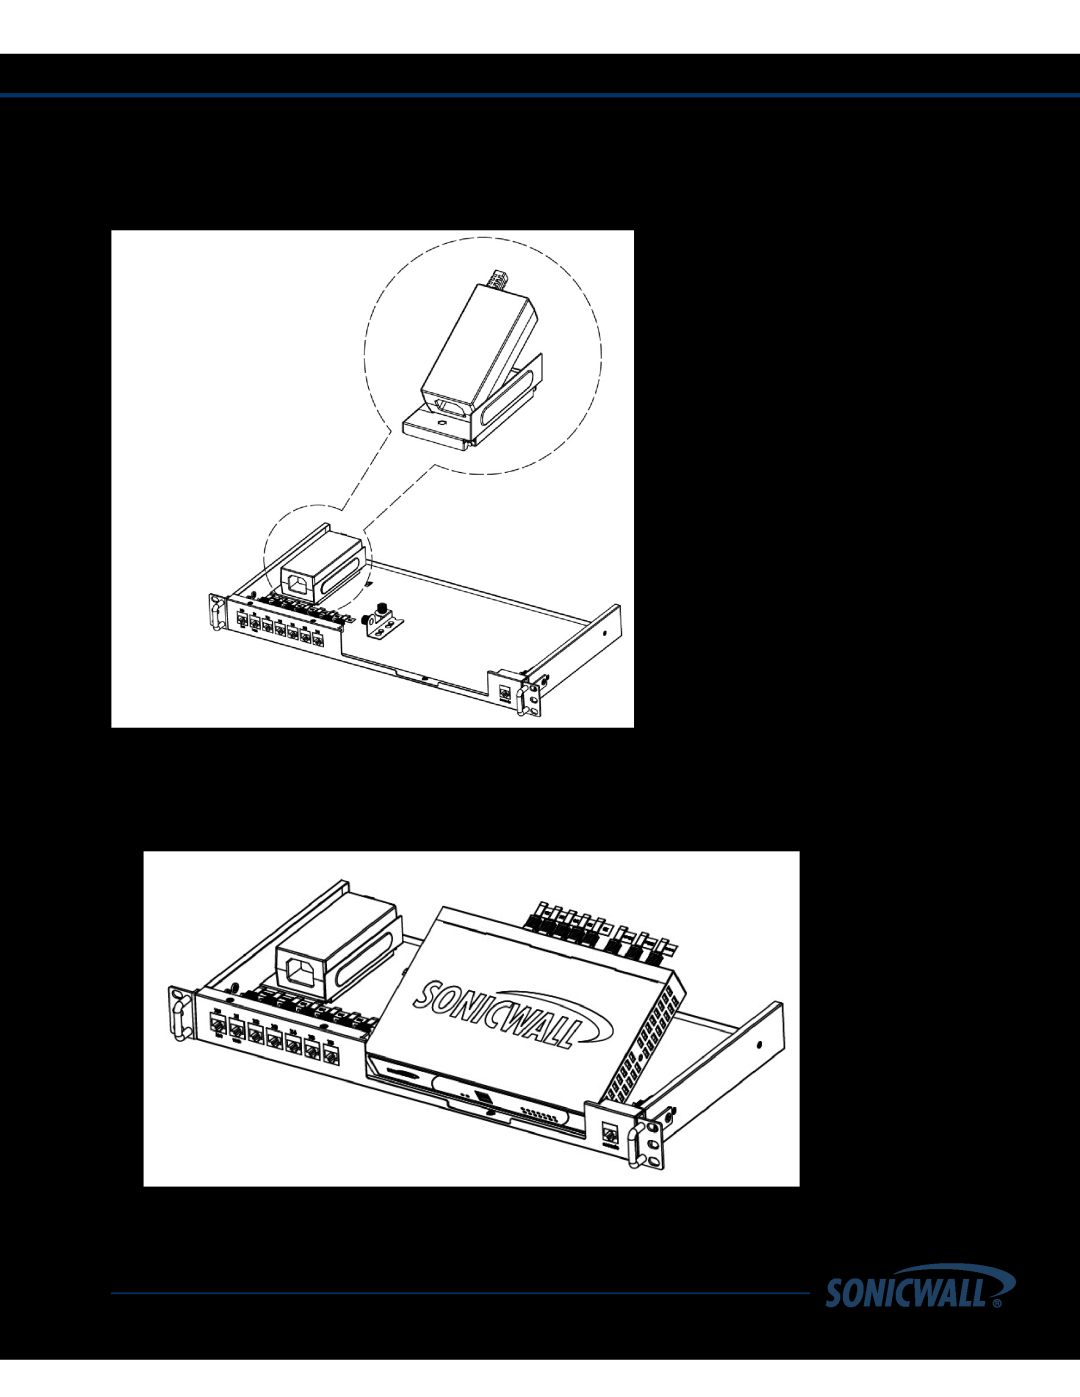 SonicWALL nsa220 manual Insert Adapter Tray - Insert the Appliance, Installation Guide 